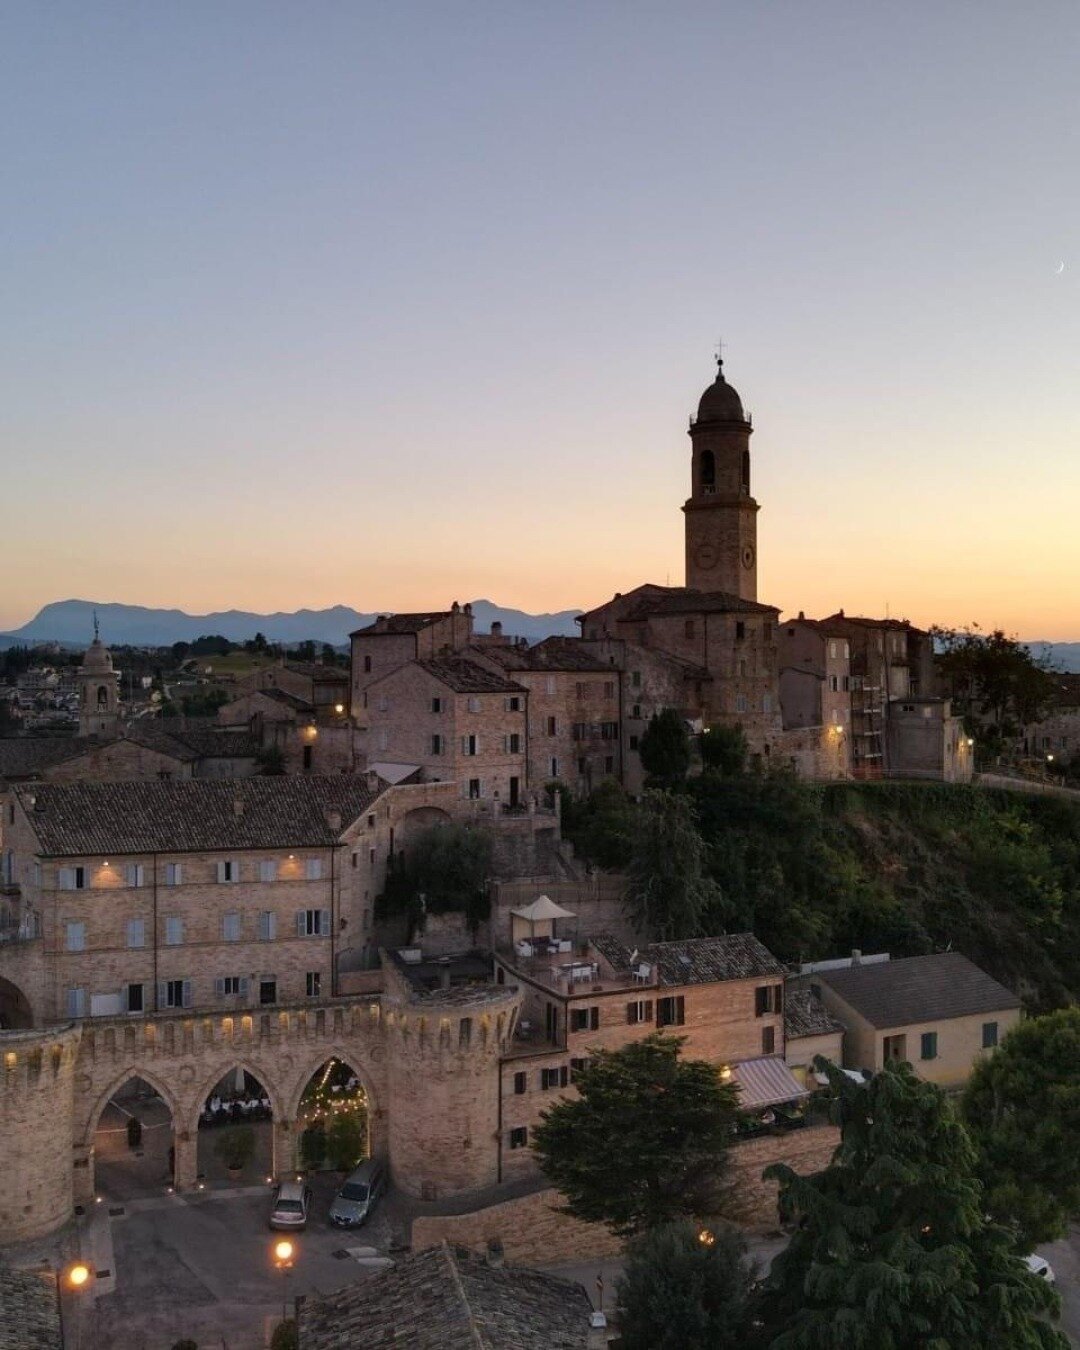 The medieval village of Petritoli offers a beautiful blend of tradition, culture and unique modern amenities.

Walk along the cobbled streets and discover stunning architecture in the form of churches, theatres and archways amongst buzzing bars and r